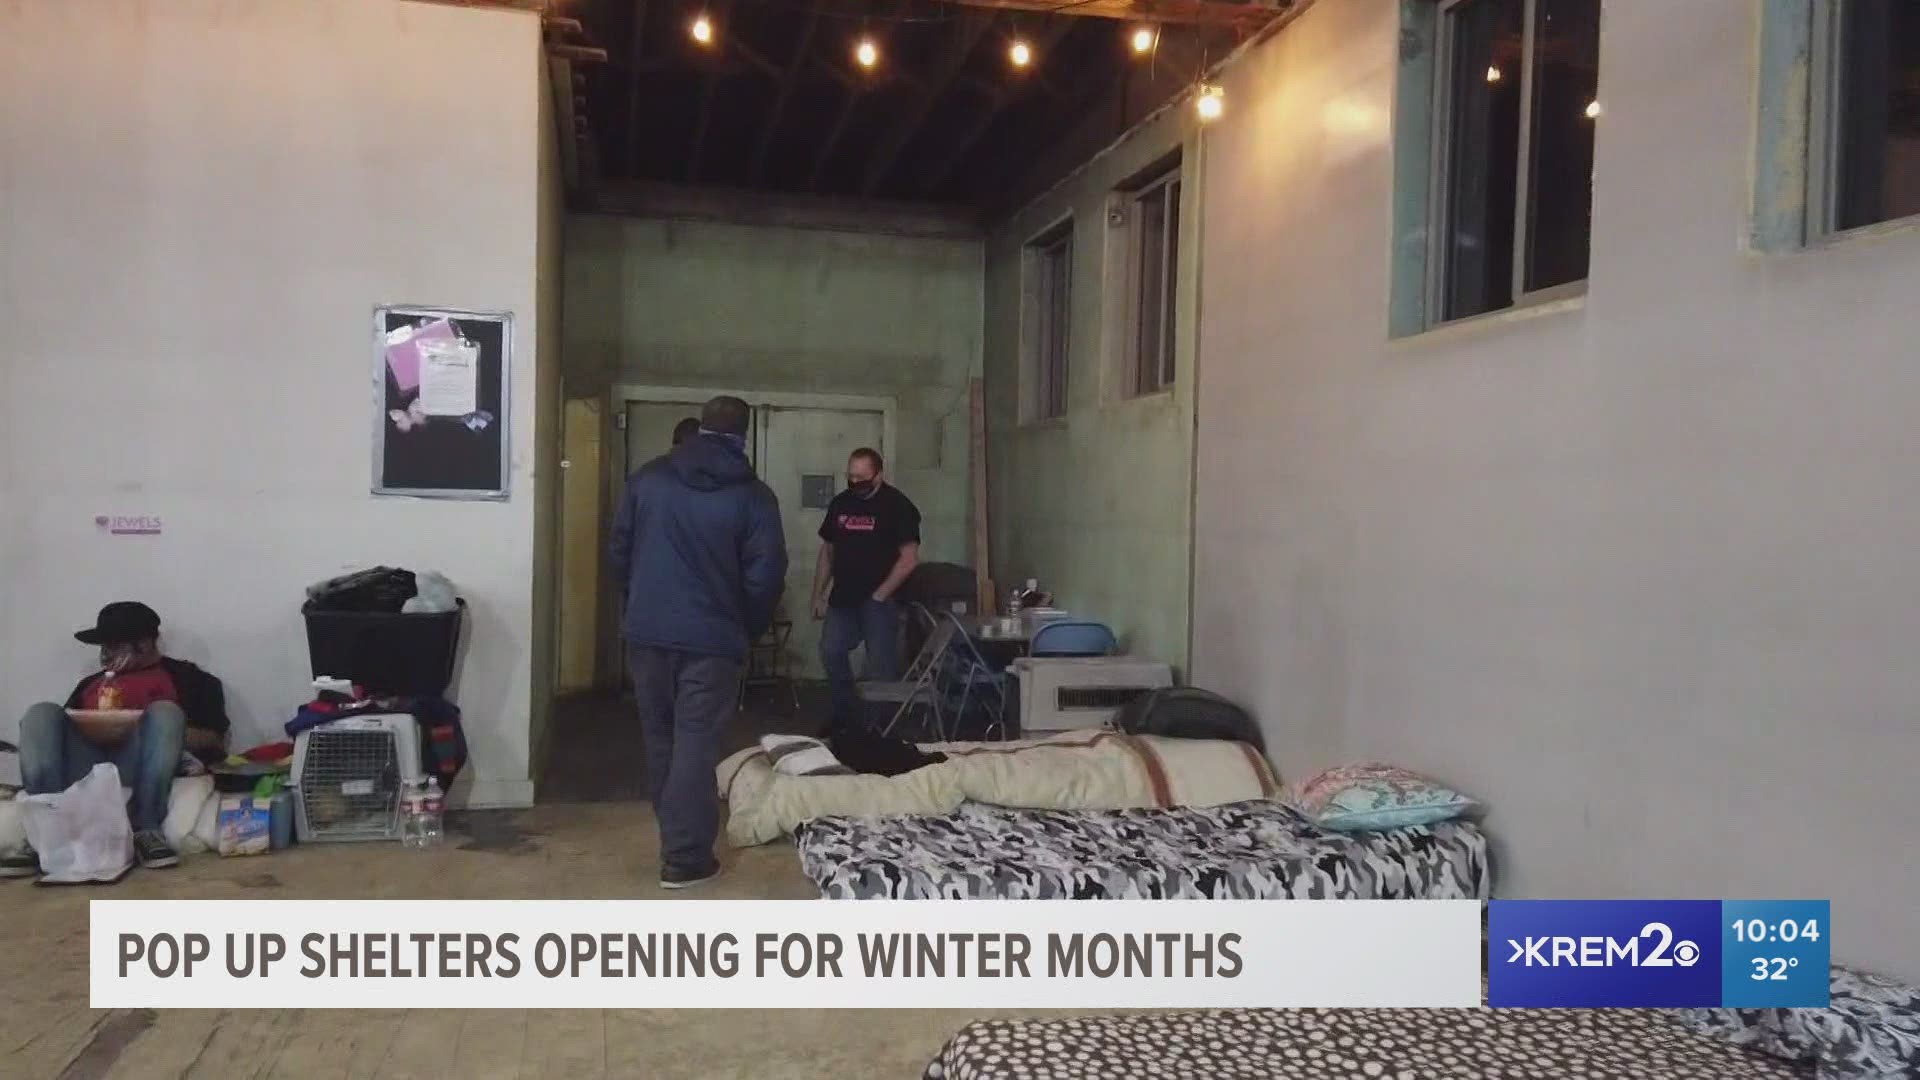 A new warming center at City Church Spokane will hold 30-40 people throughout the winter months